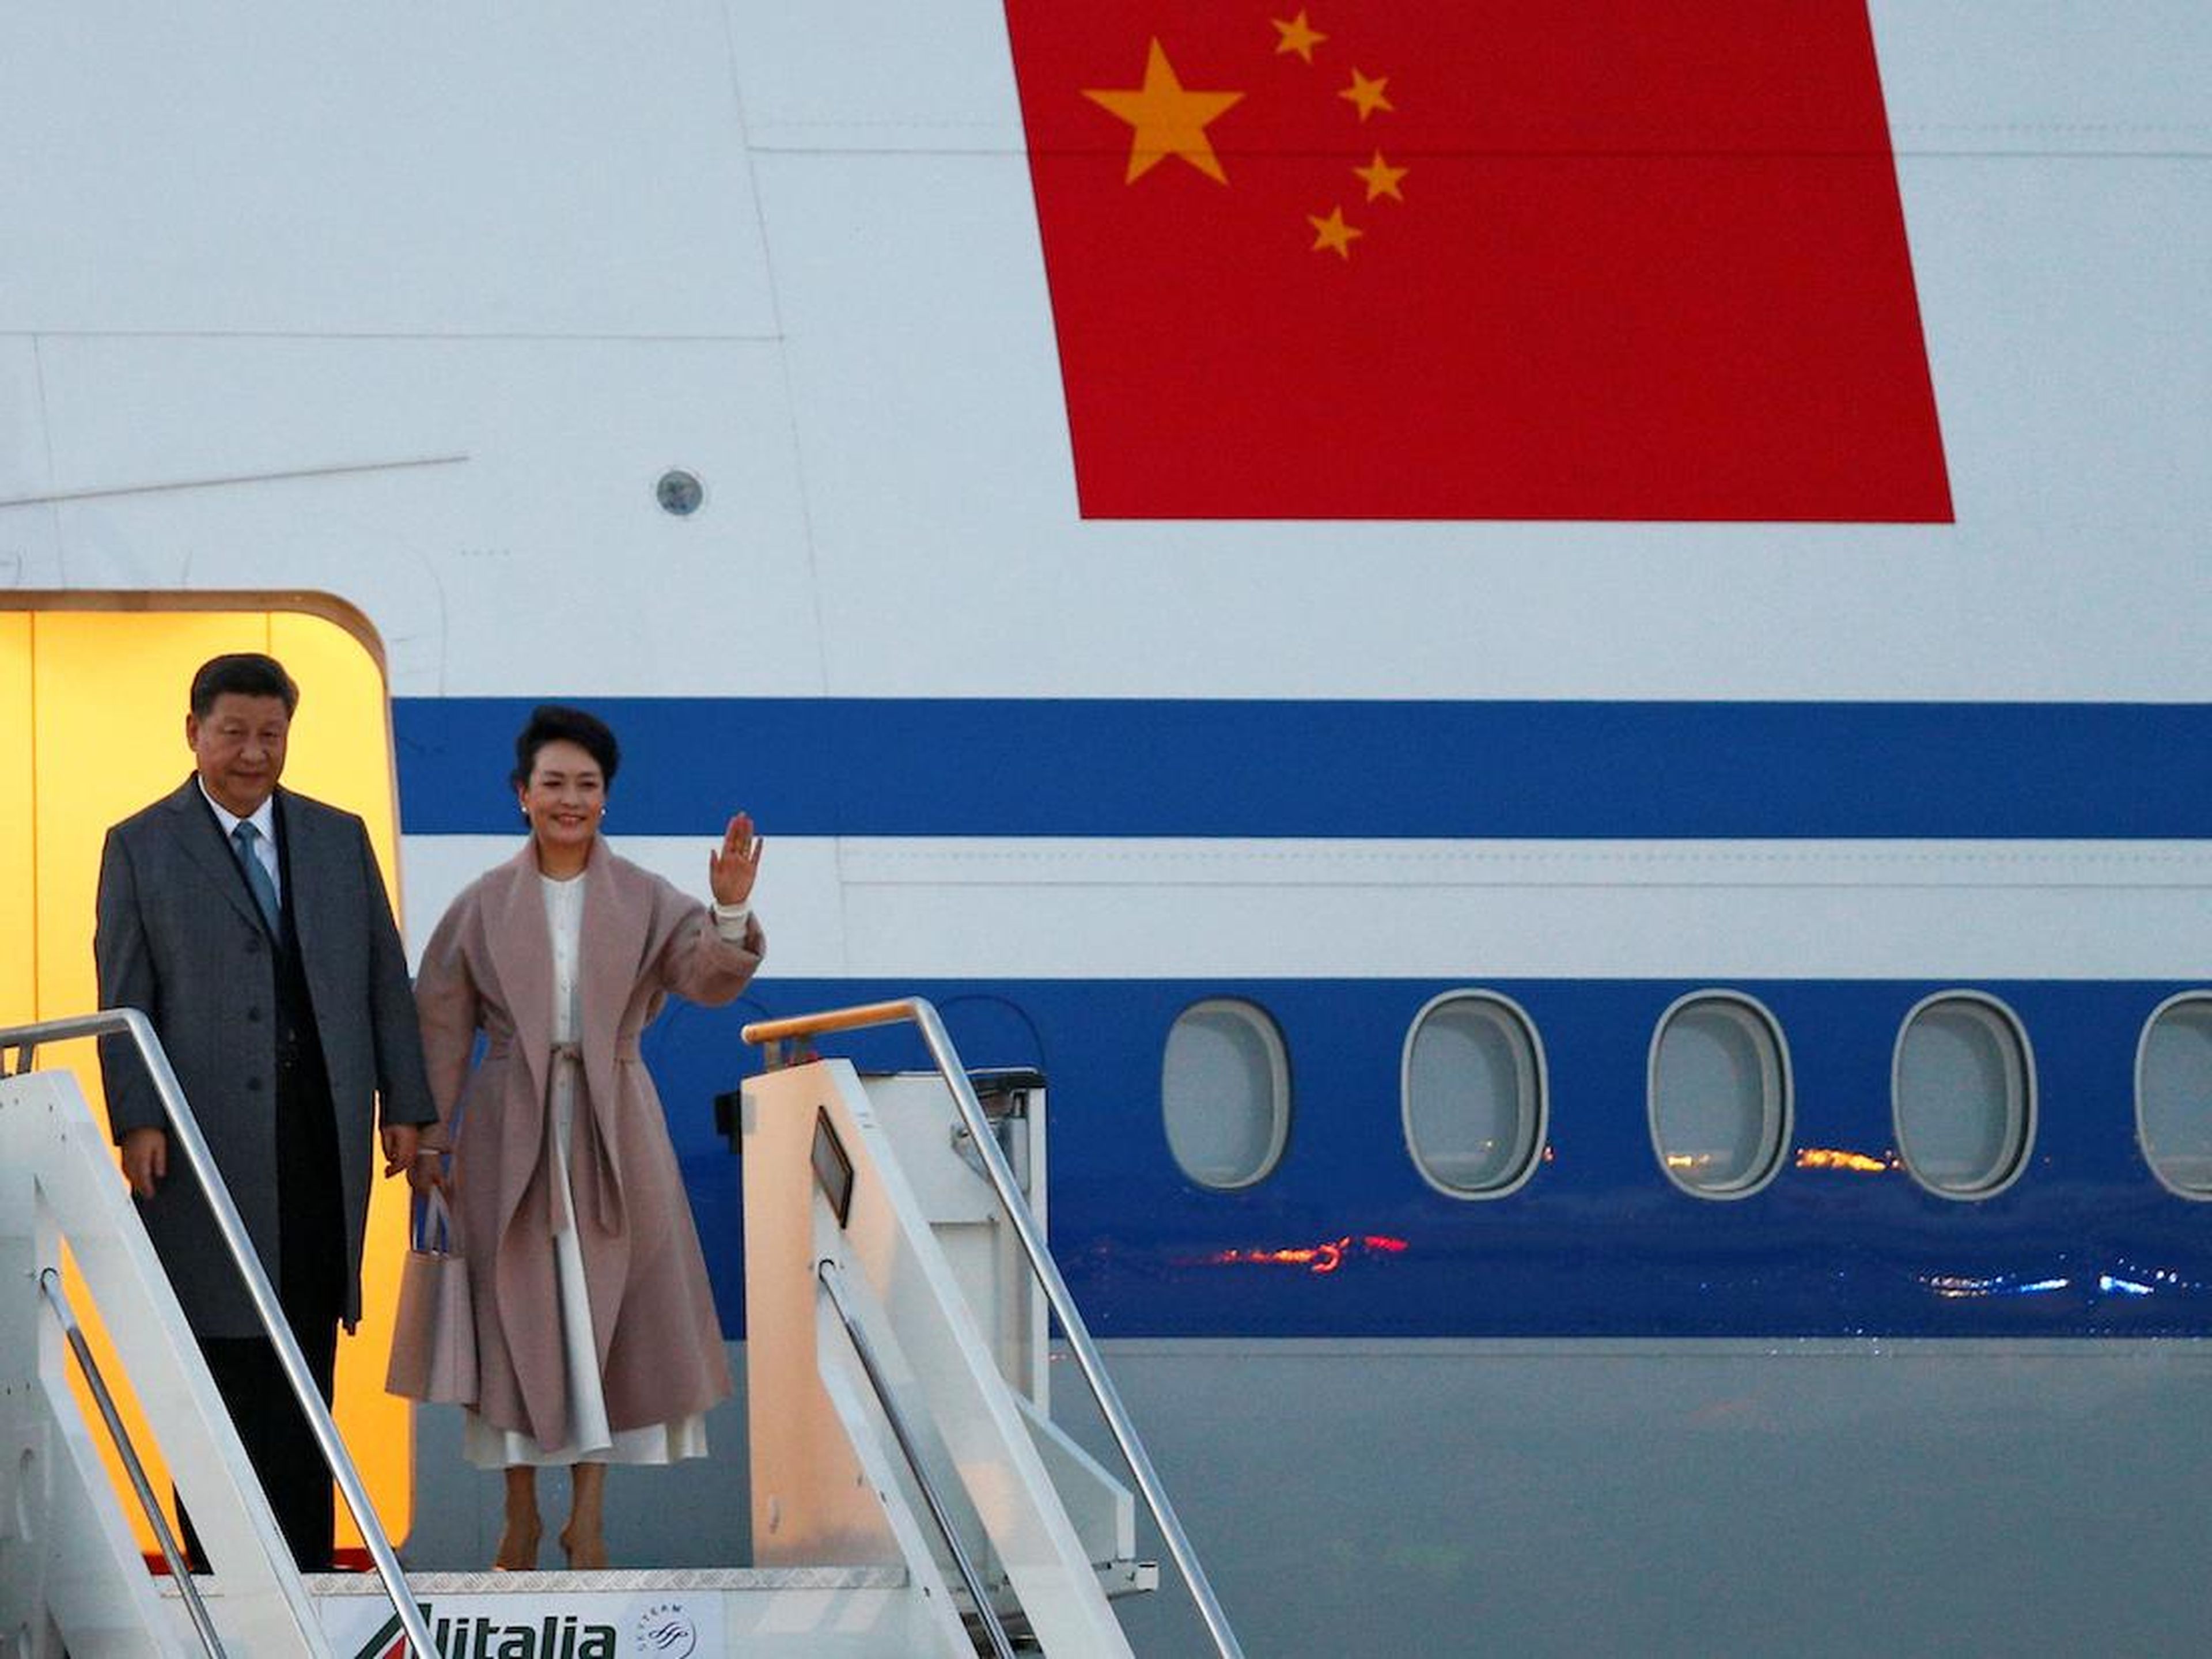 Xi Jinping and his wife Peng Liyuan arrive at Rome's Fiumicino airport on March 21, 2019.